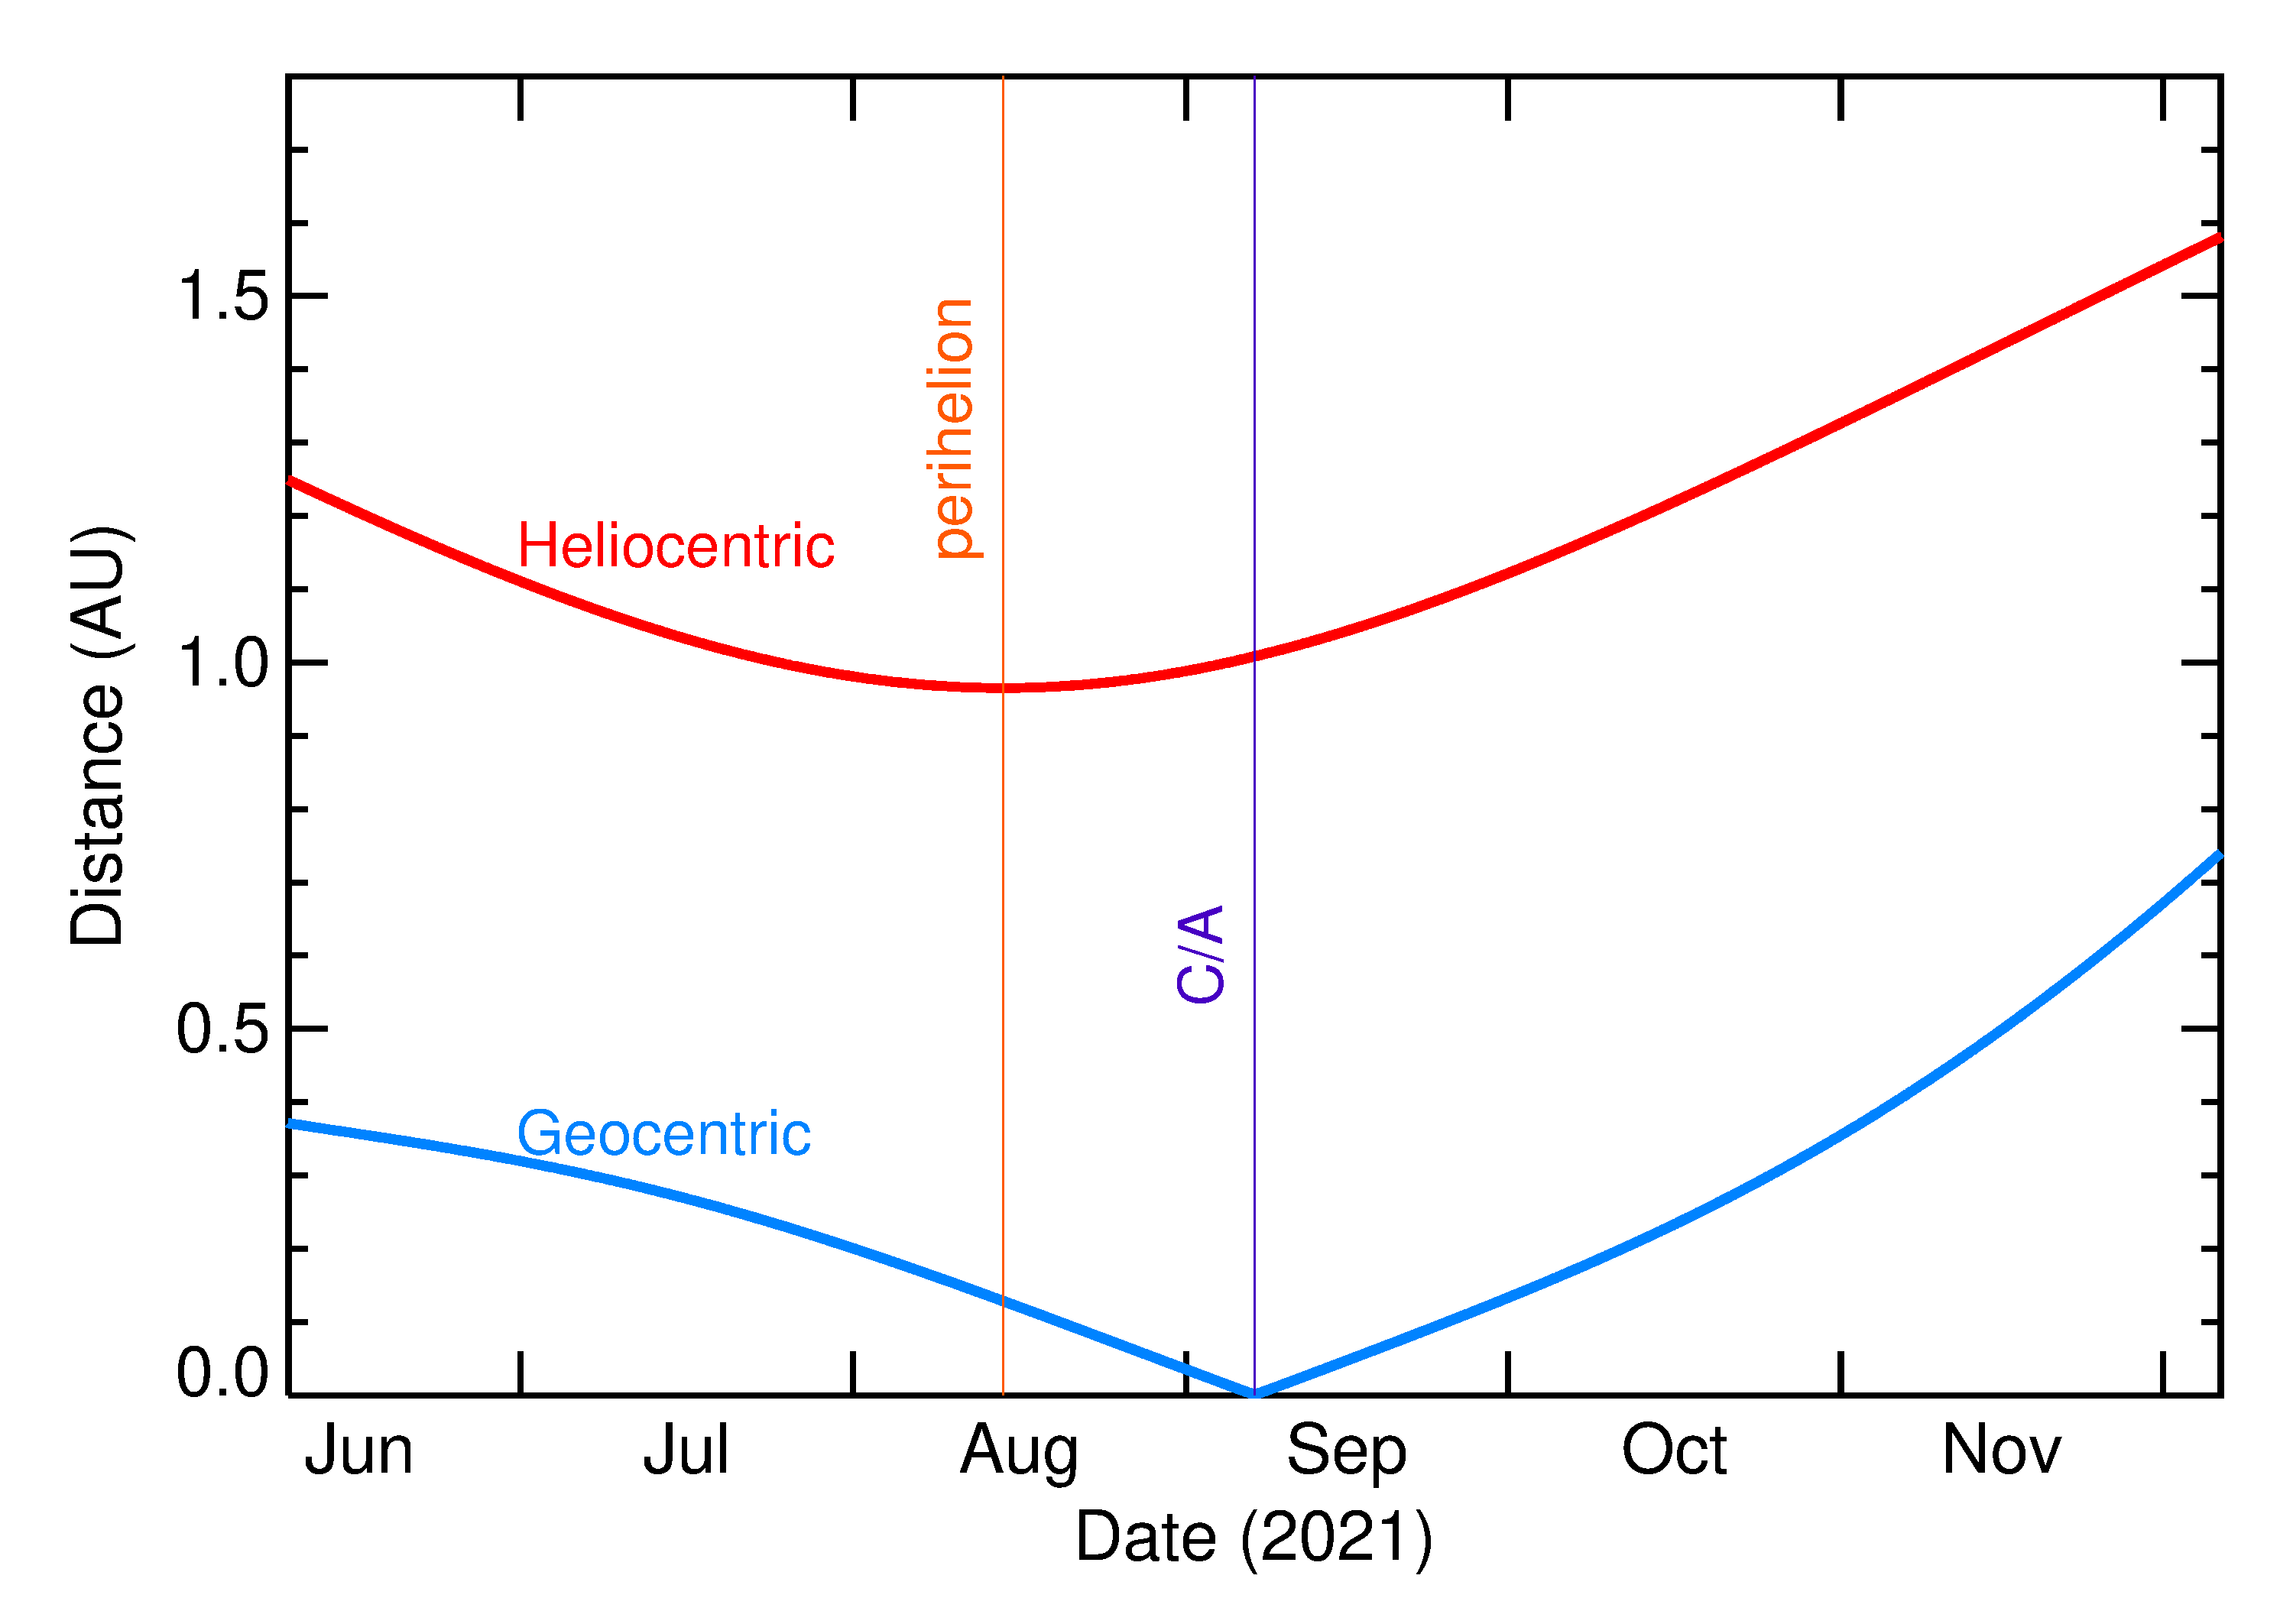 Heliocentric and Geocentric Distances of 2021 RT4 in the months around closest approach